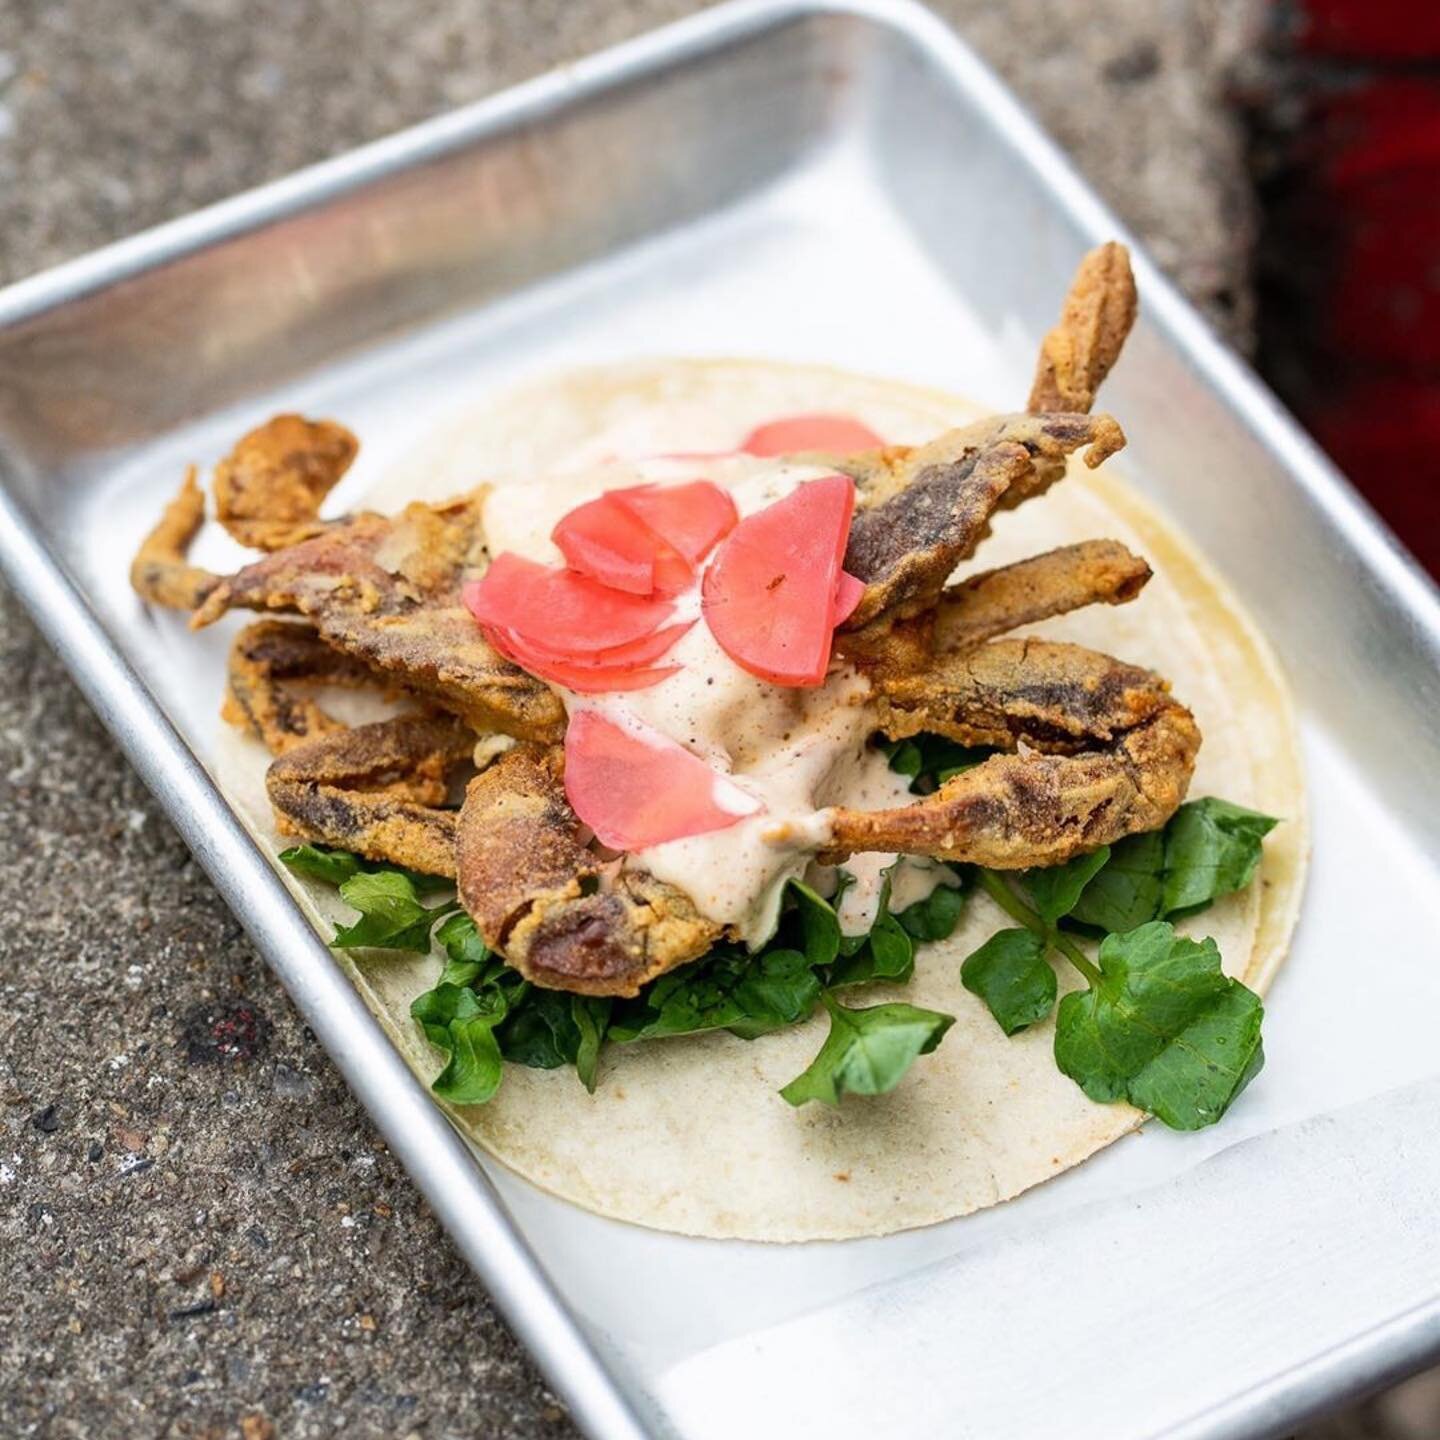 Get it while it&rsquo;s hot!! Have you tried our Fried Softshell Crab Taco?? Tell us what you think below! 👇🏽